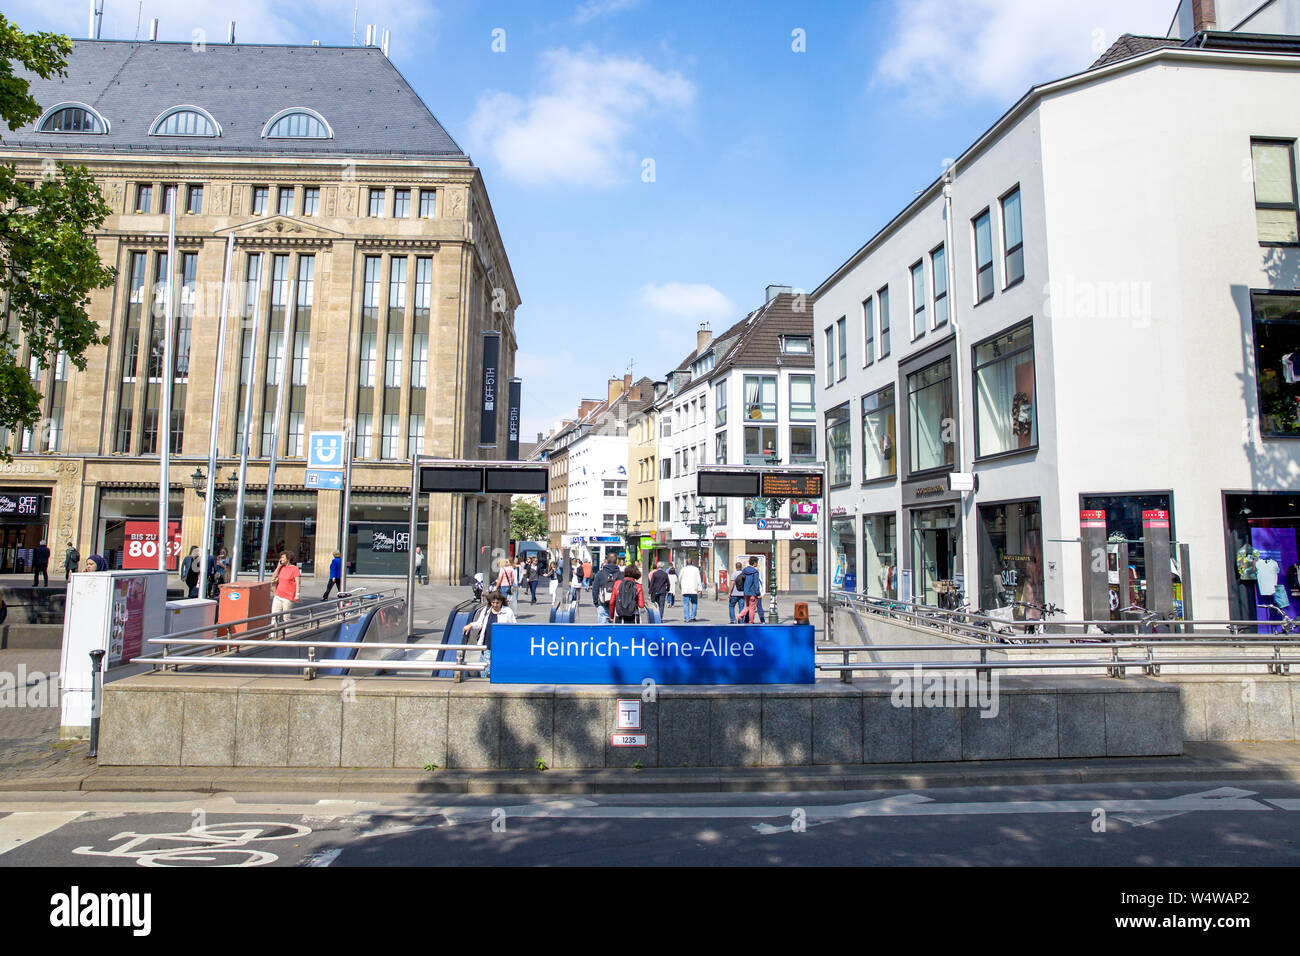 Heinrich heine allee hi-res stock photography and images - Alamy